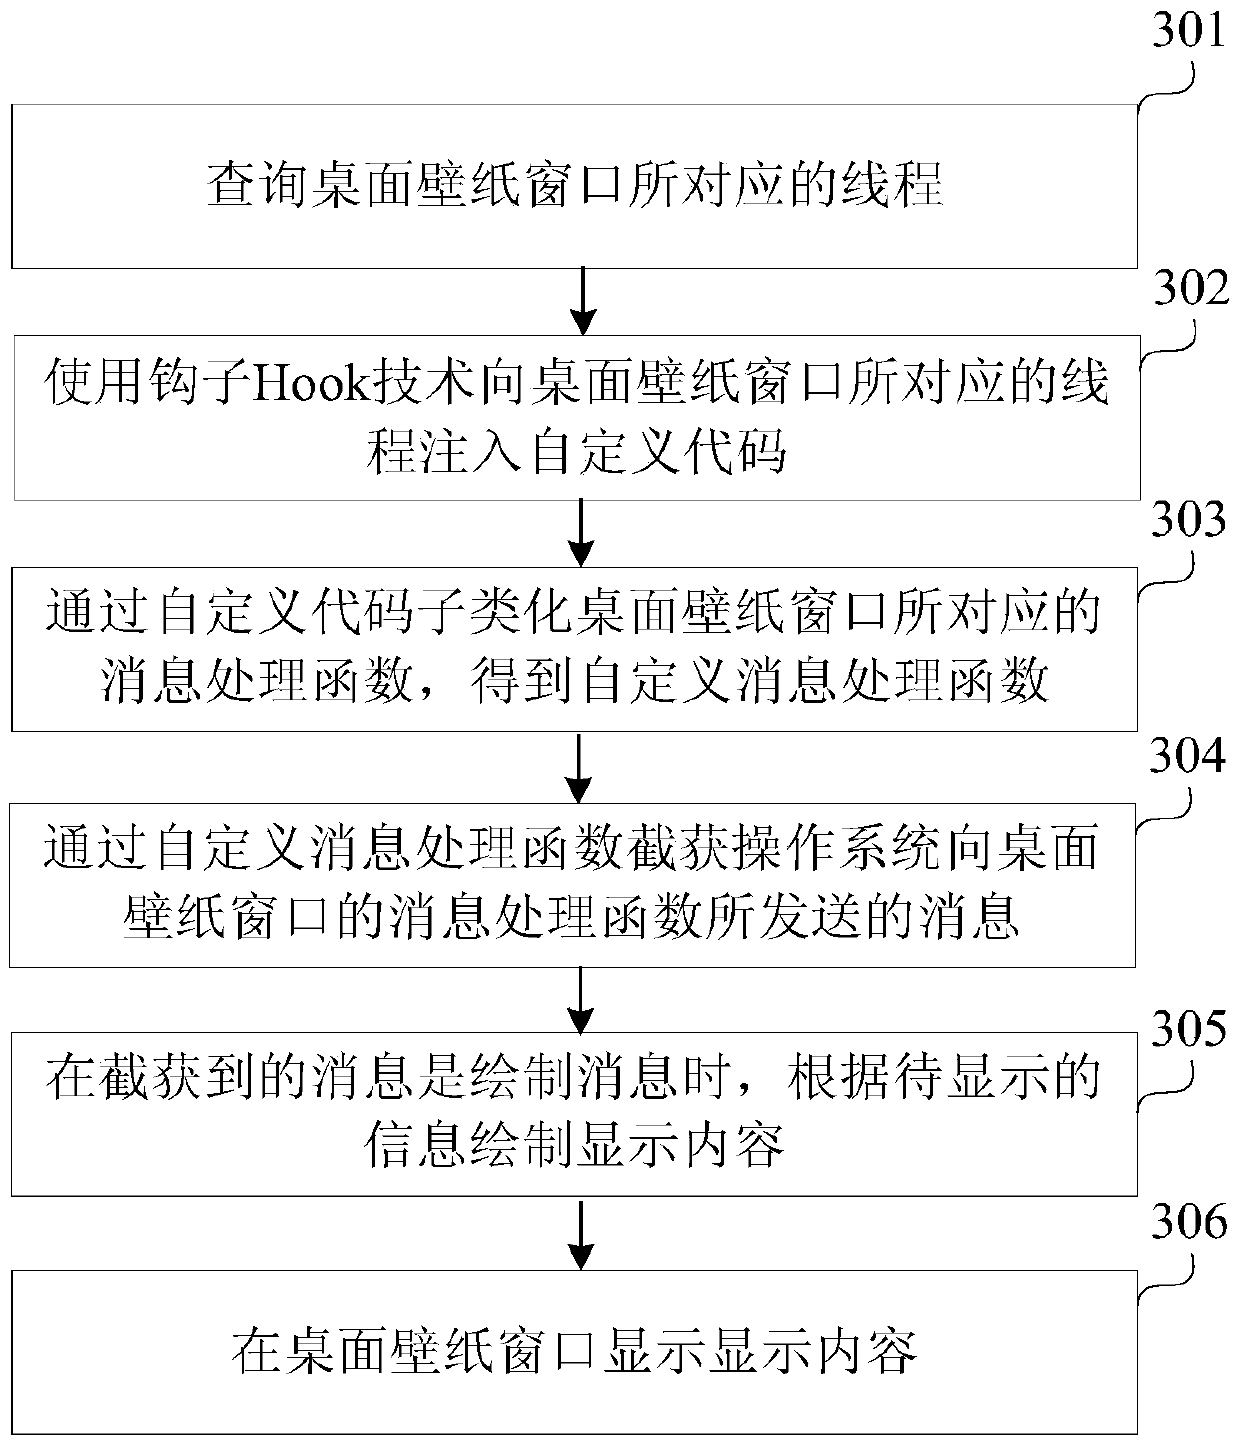 Information display method and device